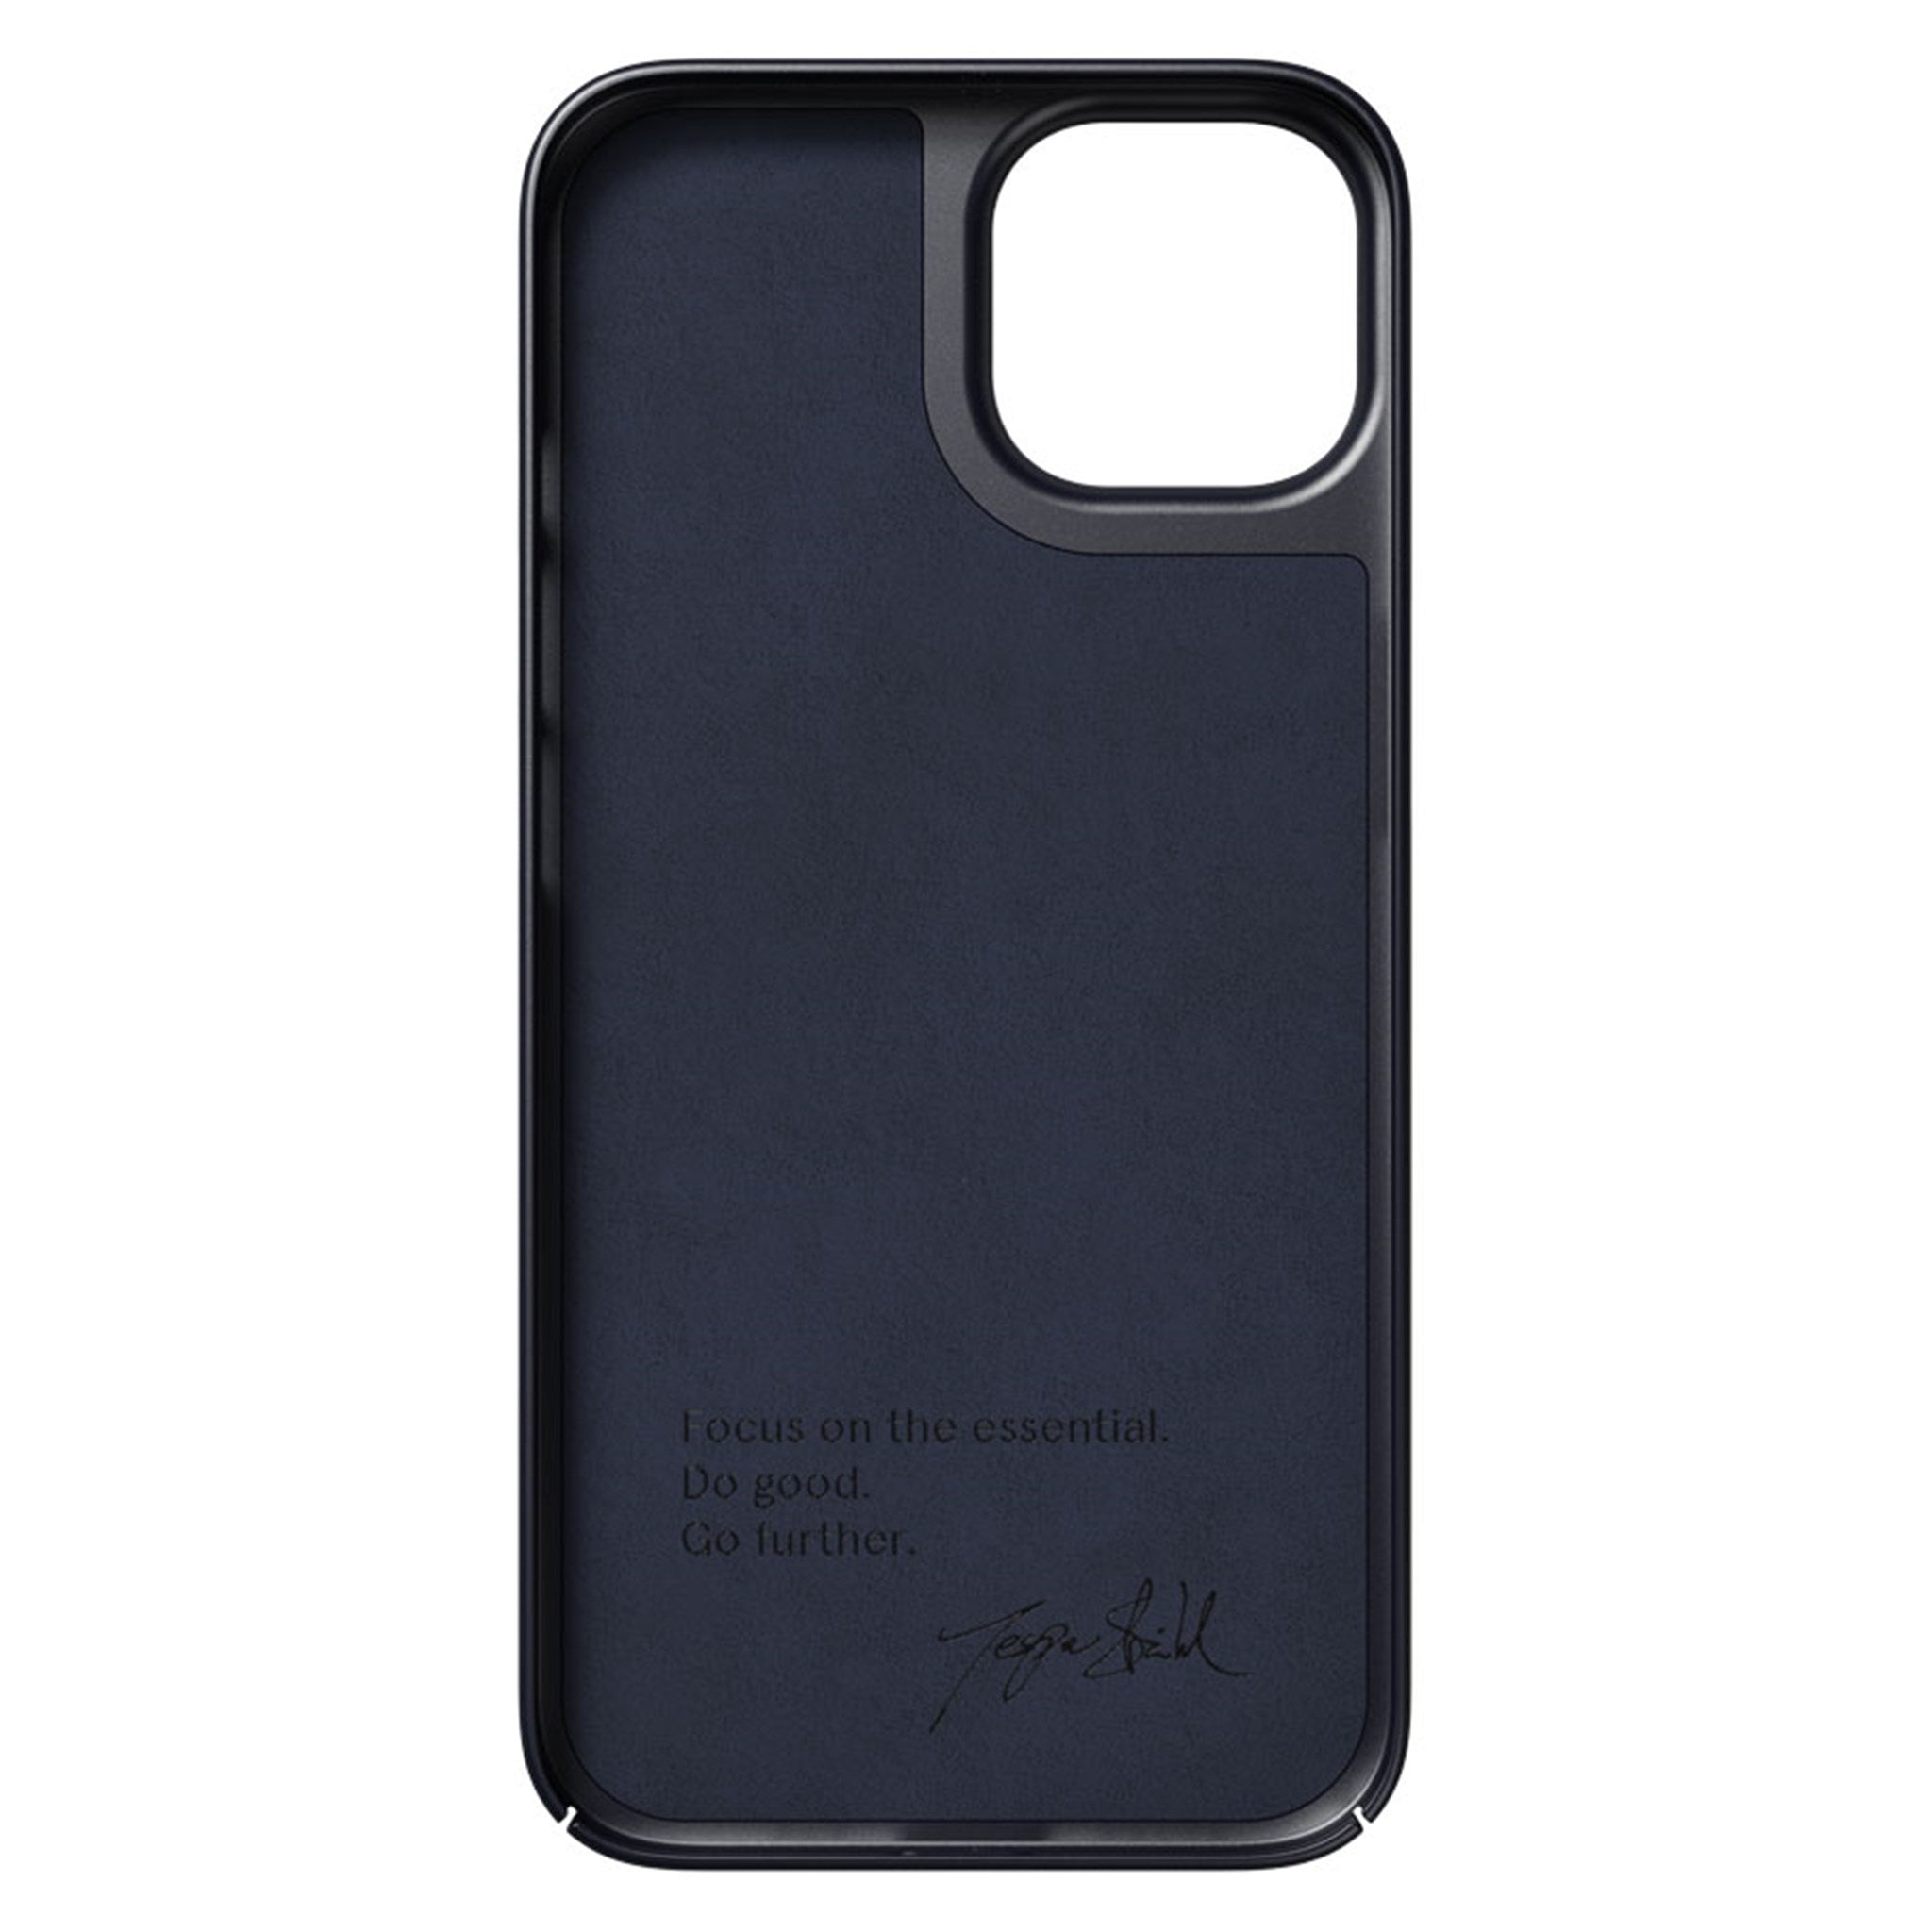 00-000-0052-0001_Nudient-iPhone-14-Pro-Thin-Cover-Midwinter-Blue_02.jpg